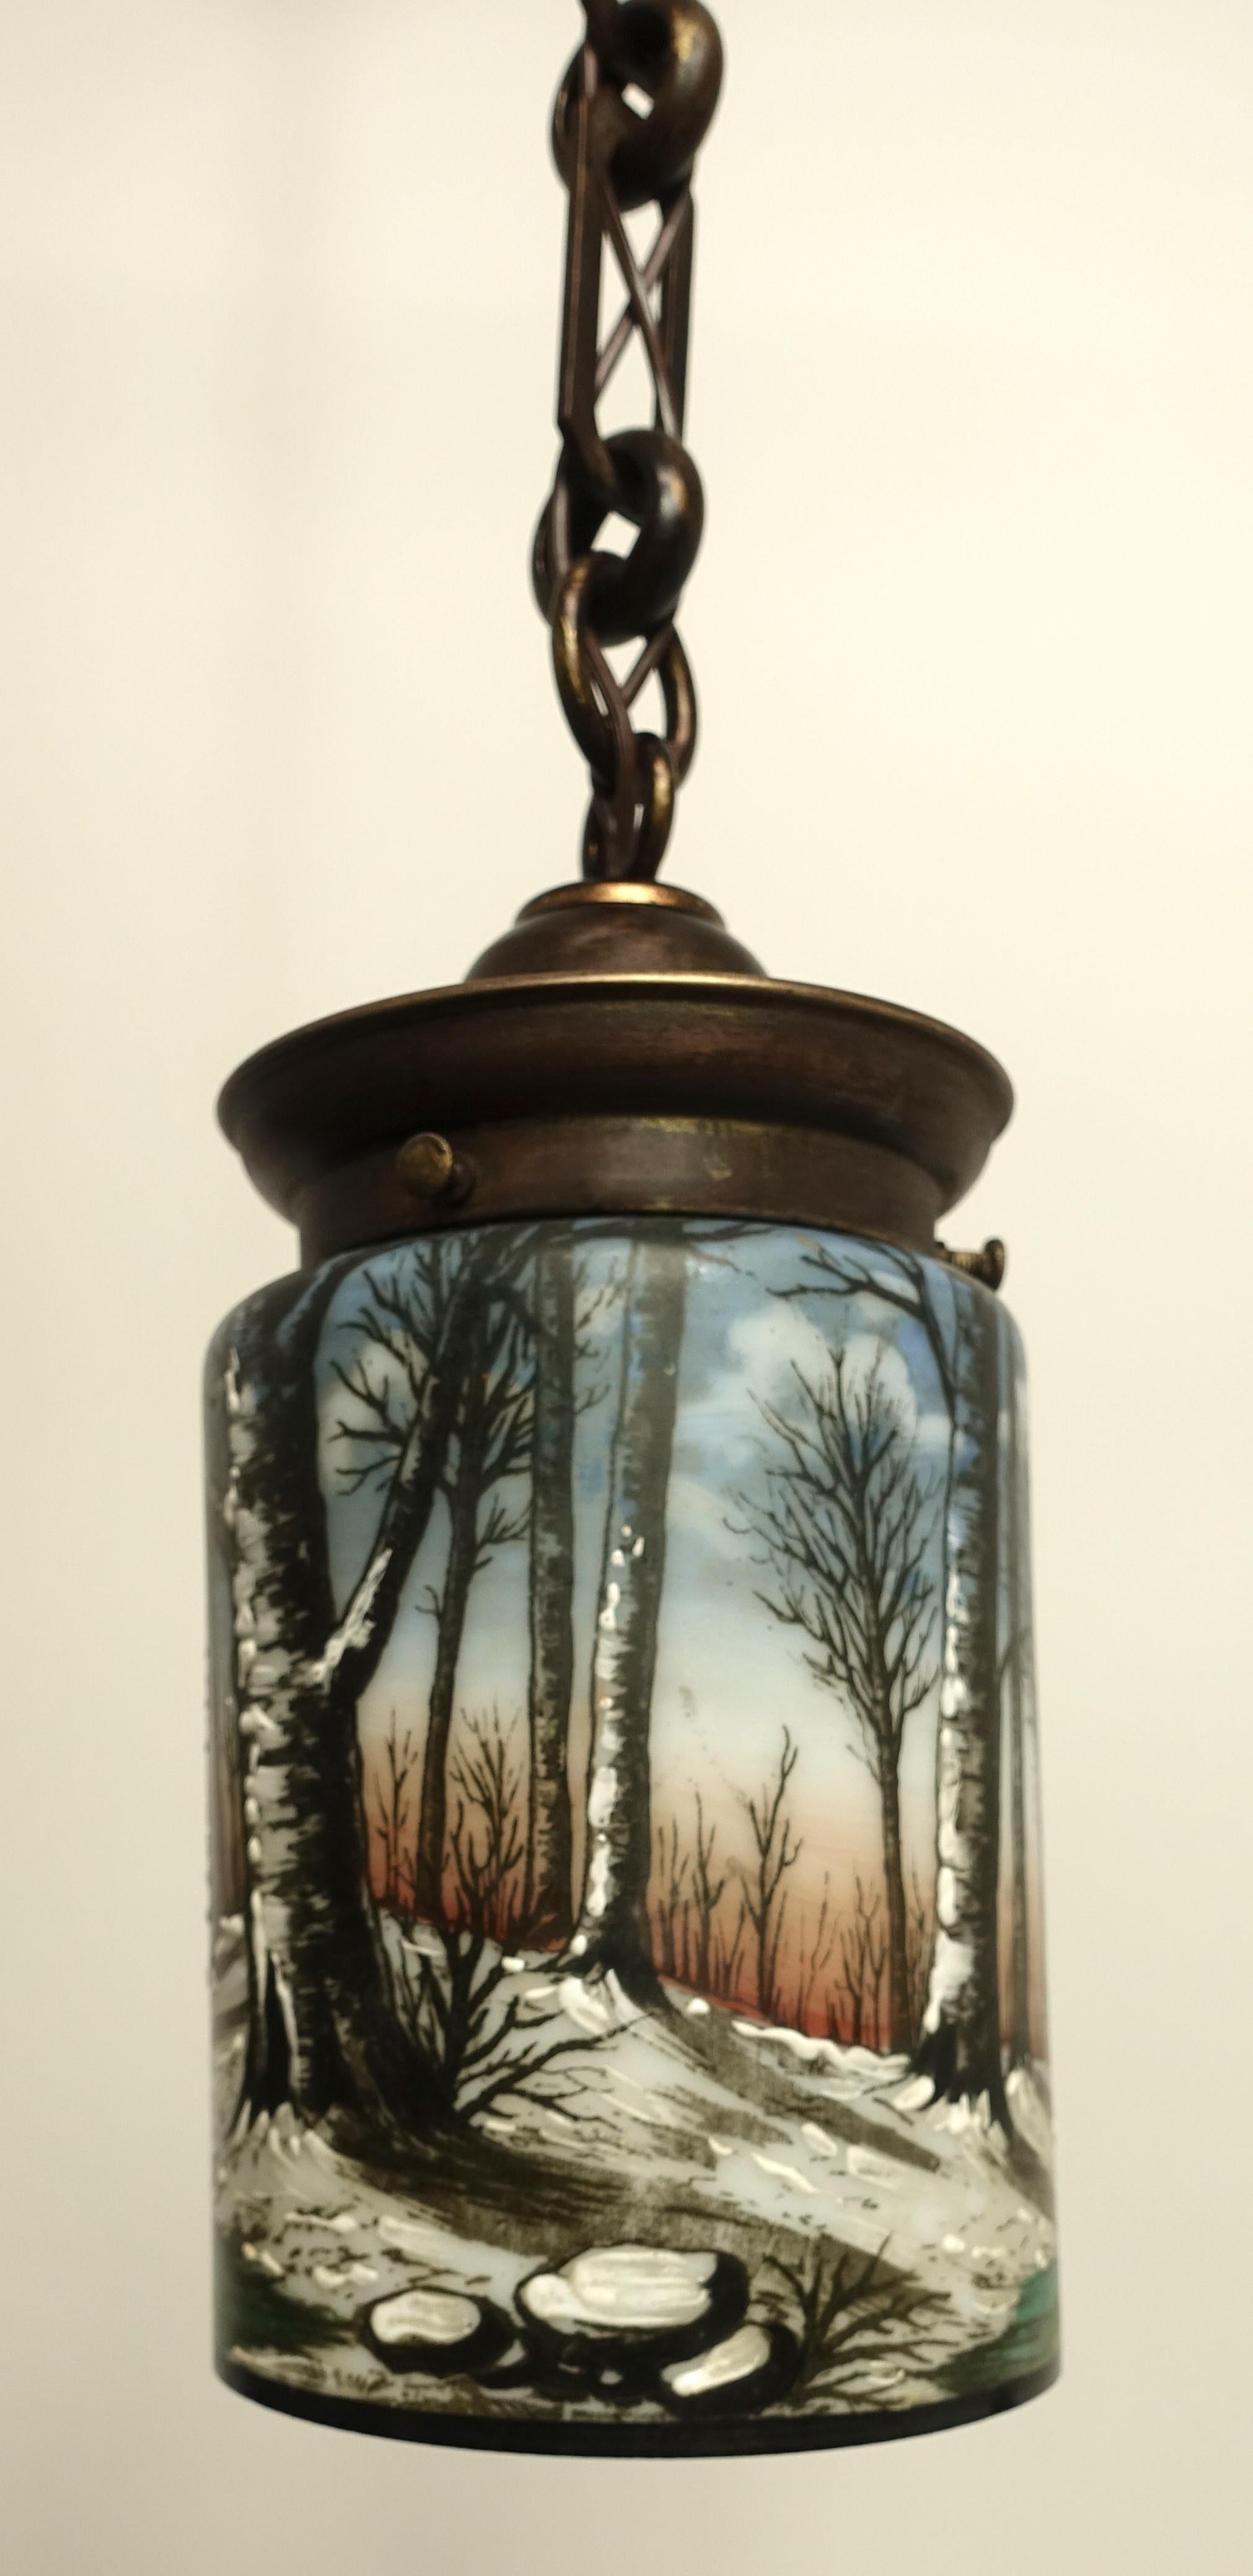 Arts and Crafts American Arts & Crafts Enameled Glass Hanging Lantern